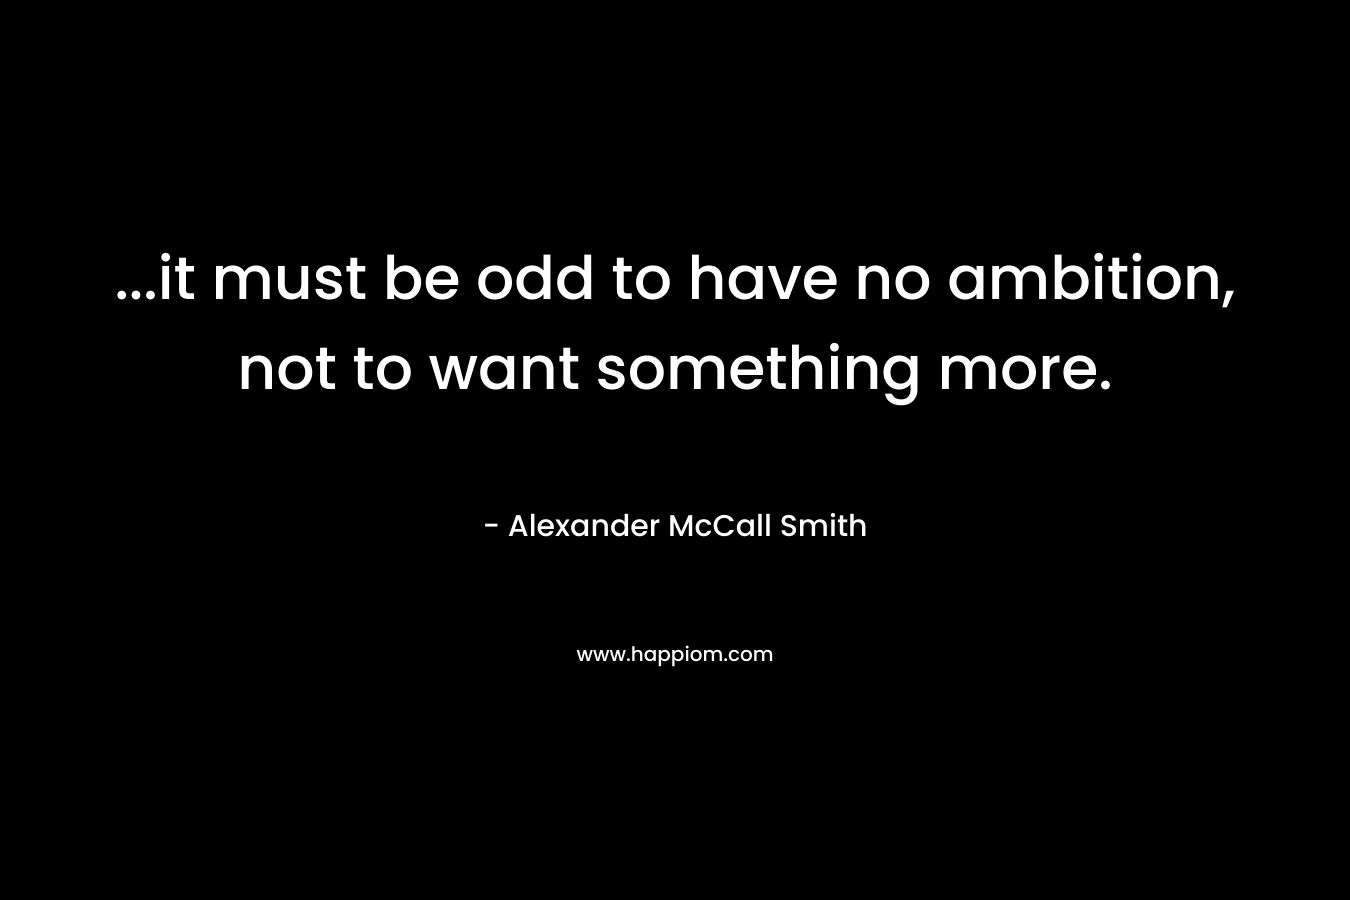 …it must be odd to have no ambition, not to want something more. – Alexander McCall Smith